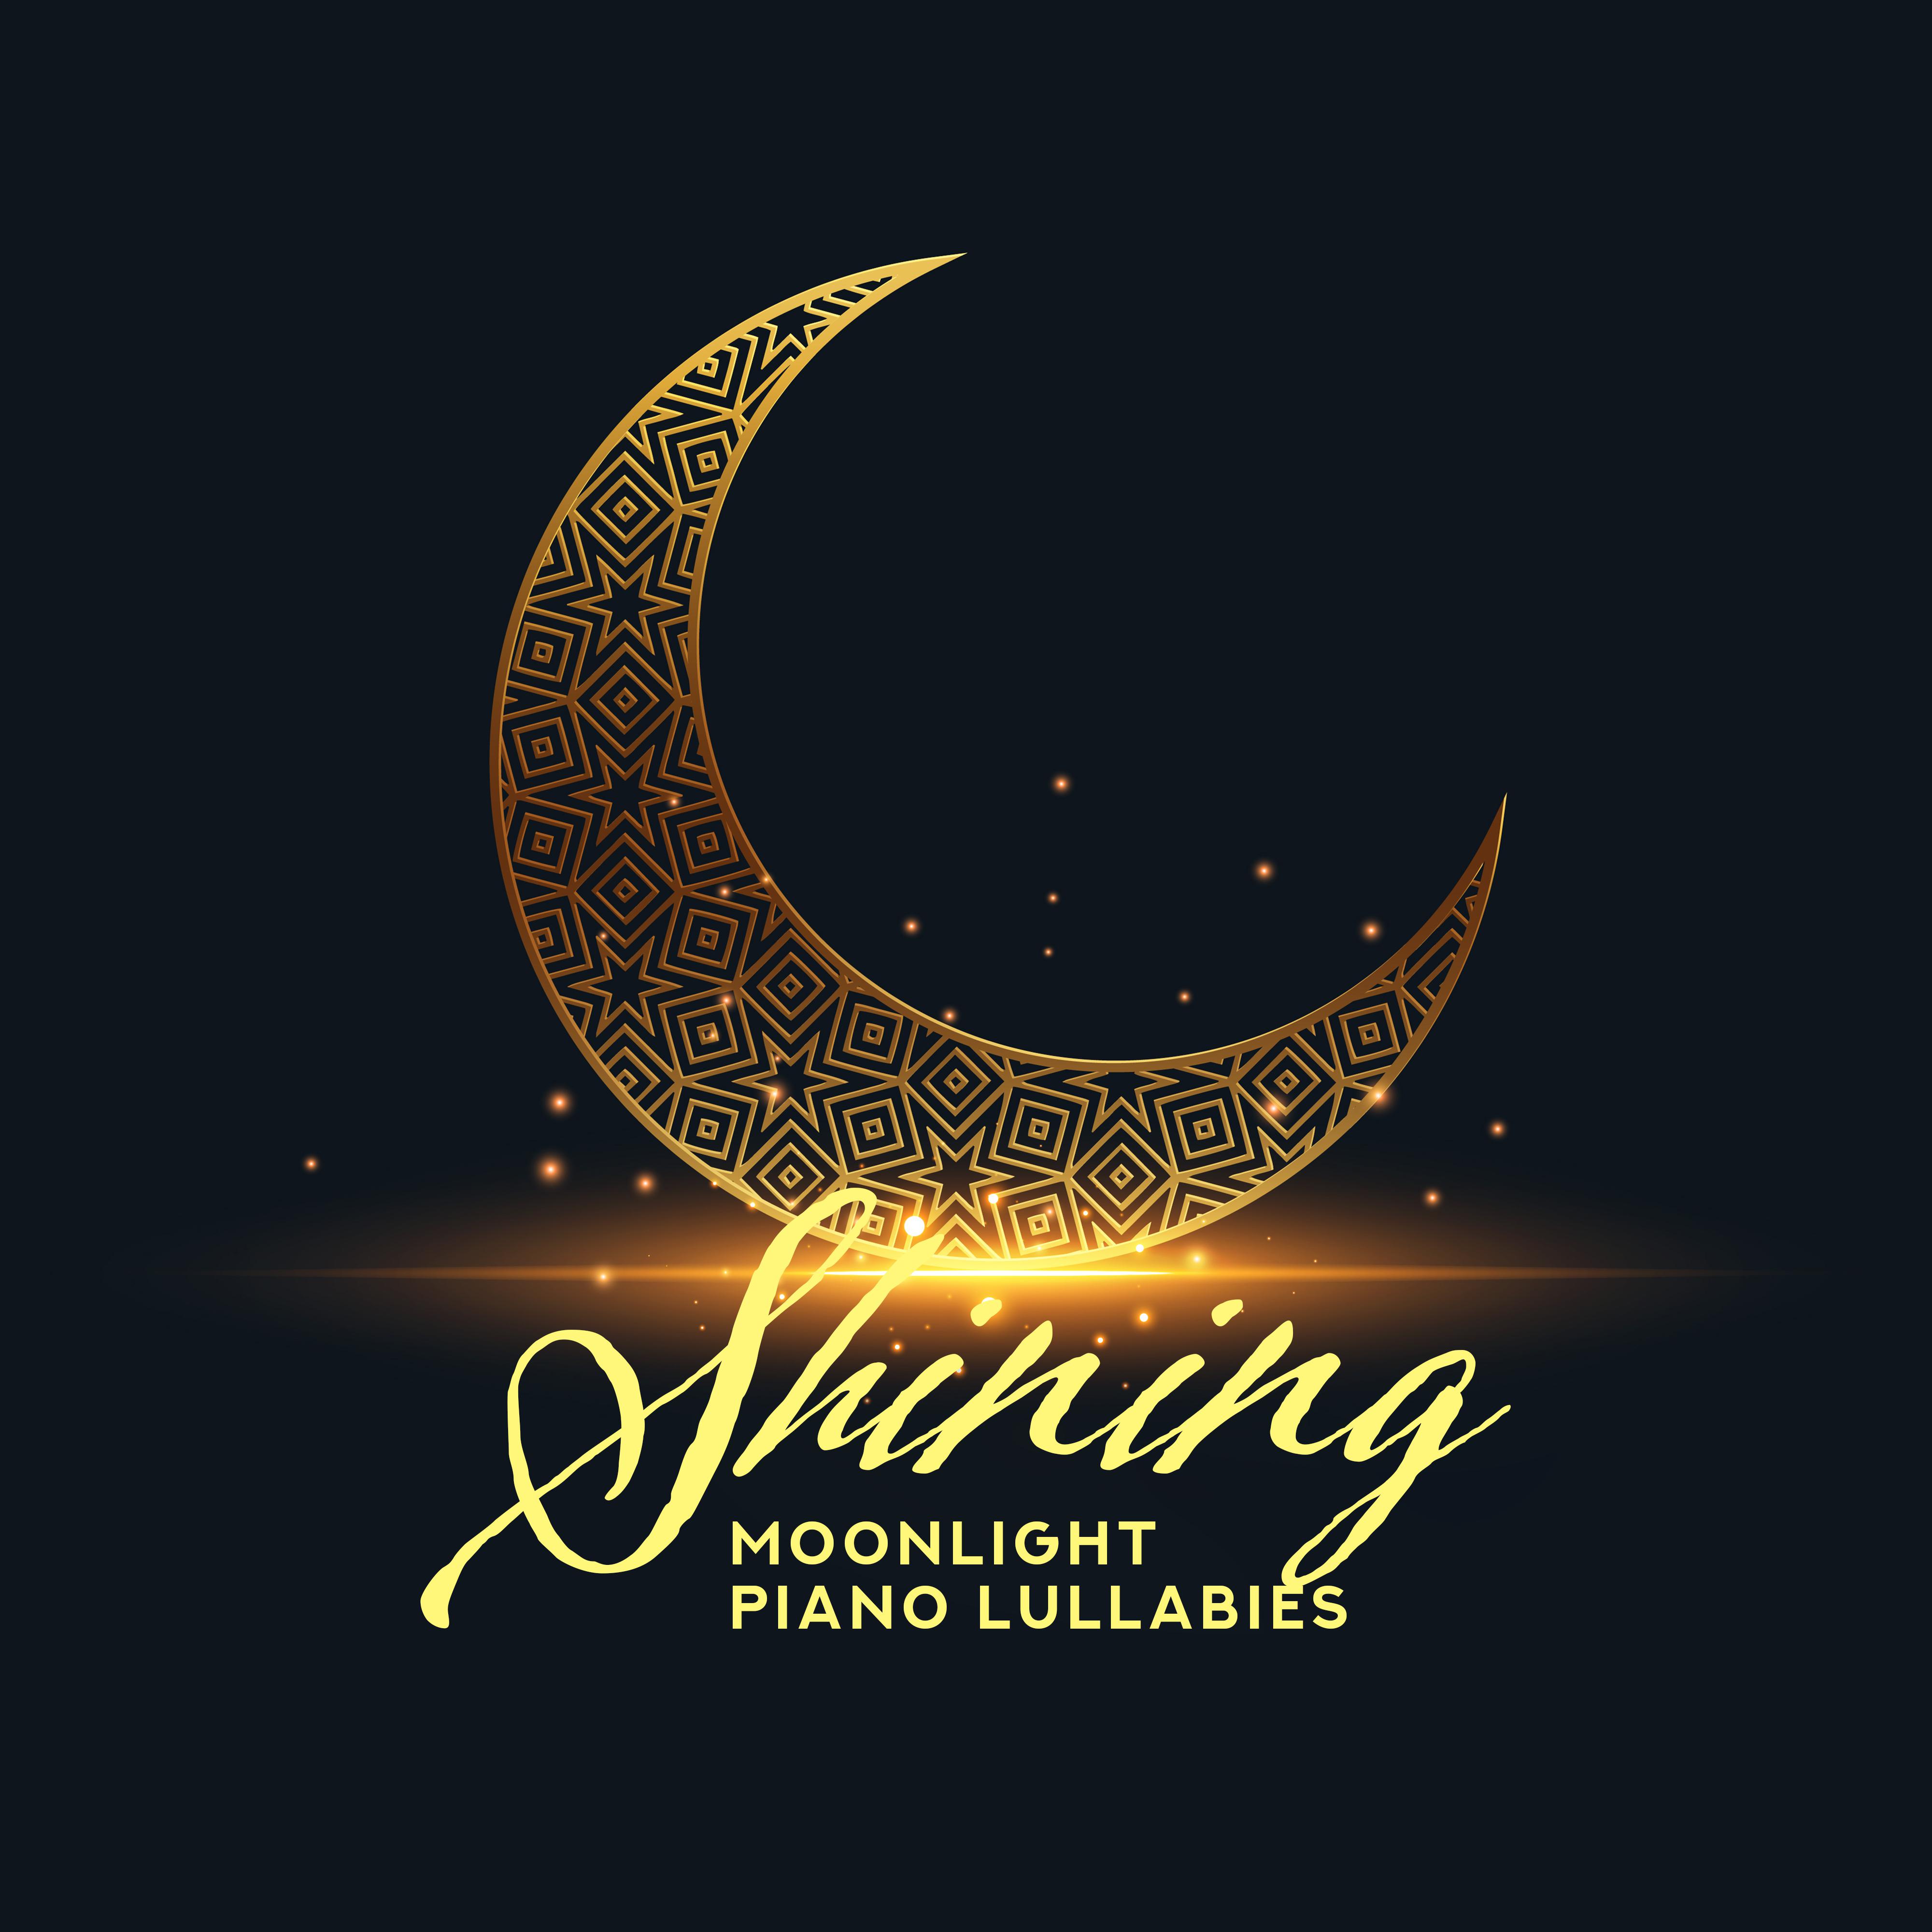 Shining Moonlight Piano Lullabies: 2019 Compilation of Most Beautiful Piano Jazz Songs, Perfect Music for Calming Down, Stress Reduce, Sleep Well All Night & Dream Beautiful